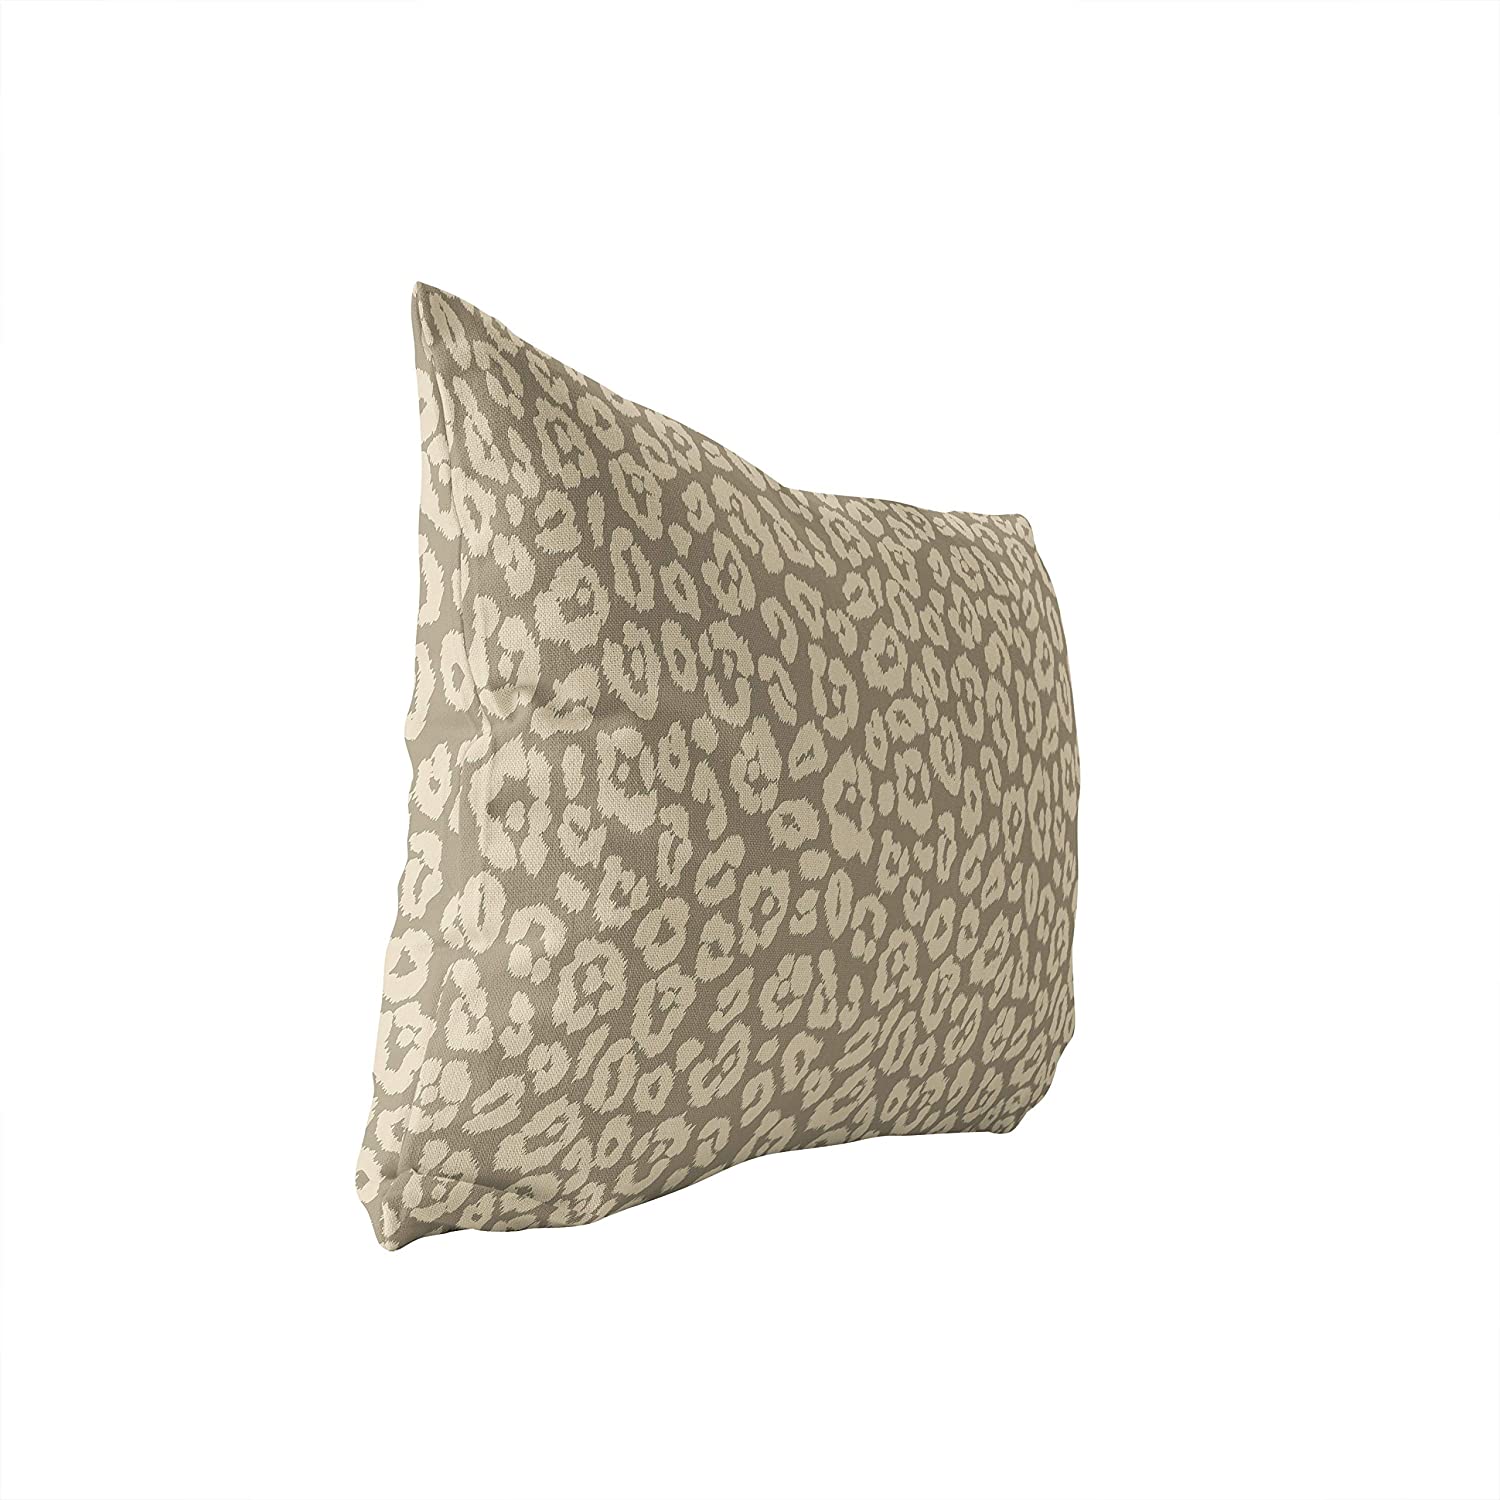 UKN Leopard Beige Lumbar Pillow Beige Animal Modern Contemporary Polyester Single Removable Cover